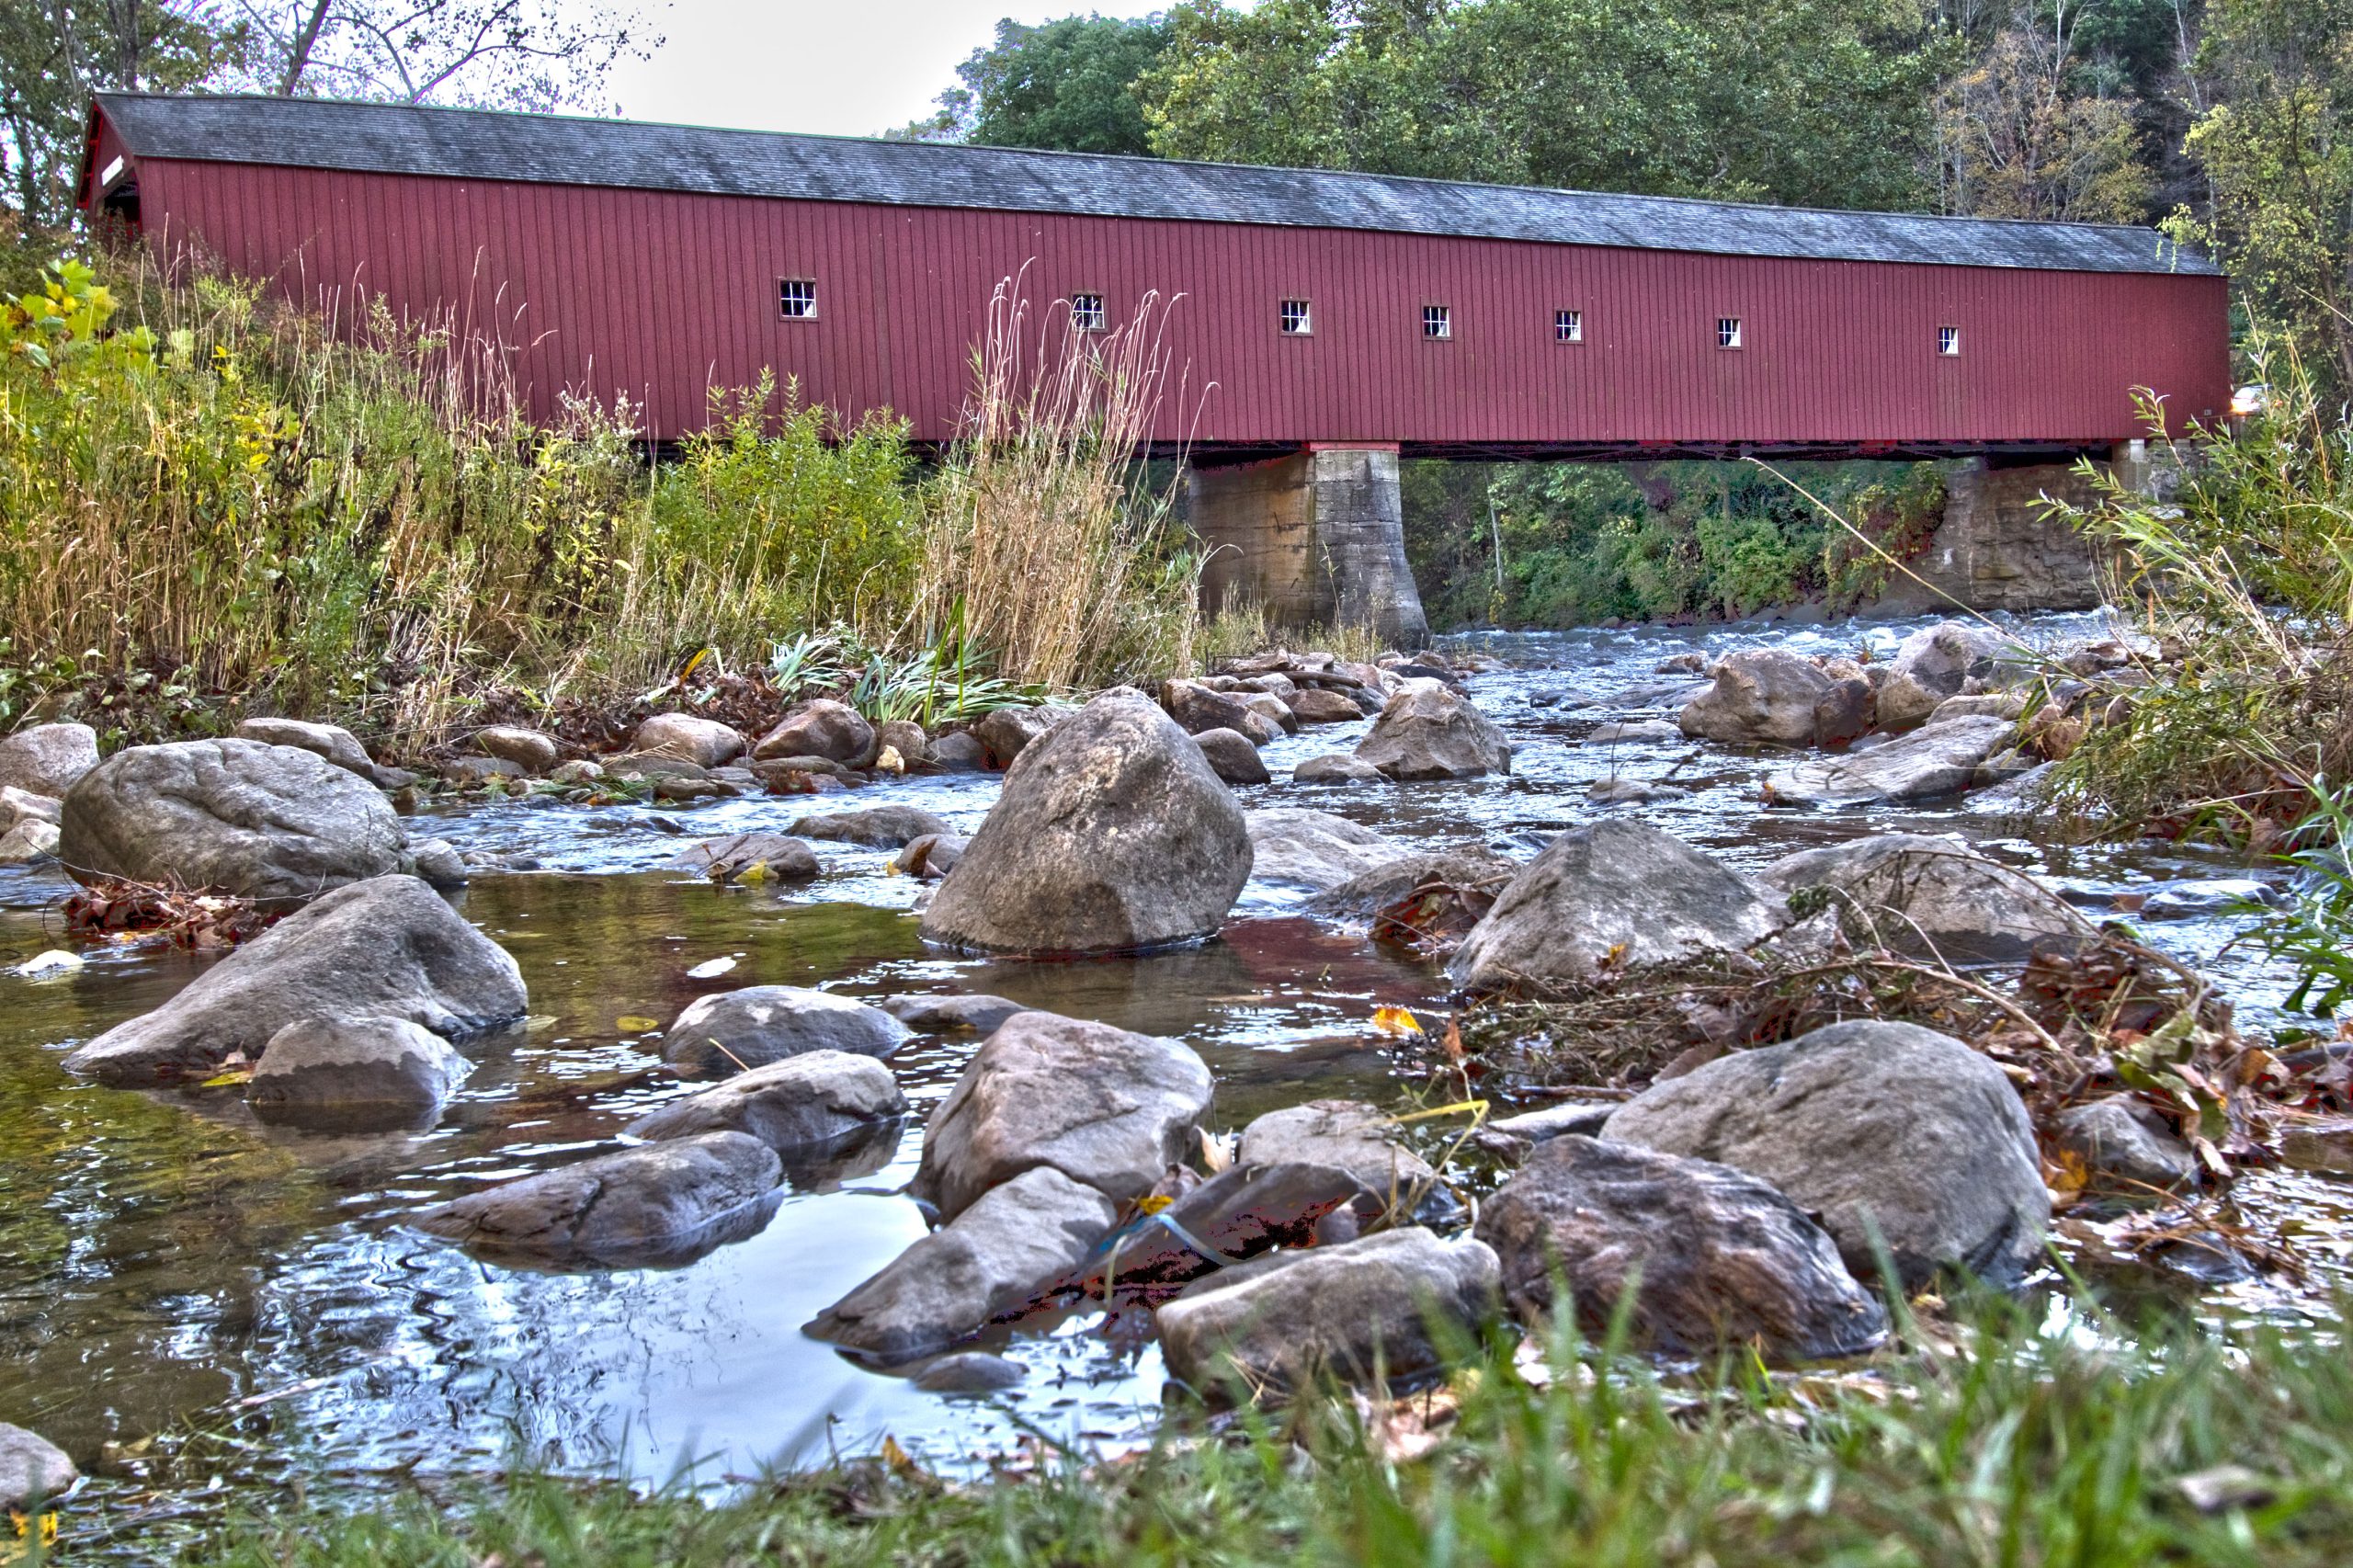 Cornwall Covered Bridge (user submitted)